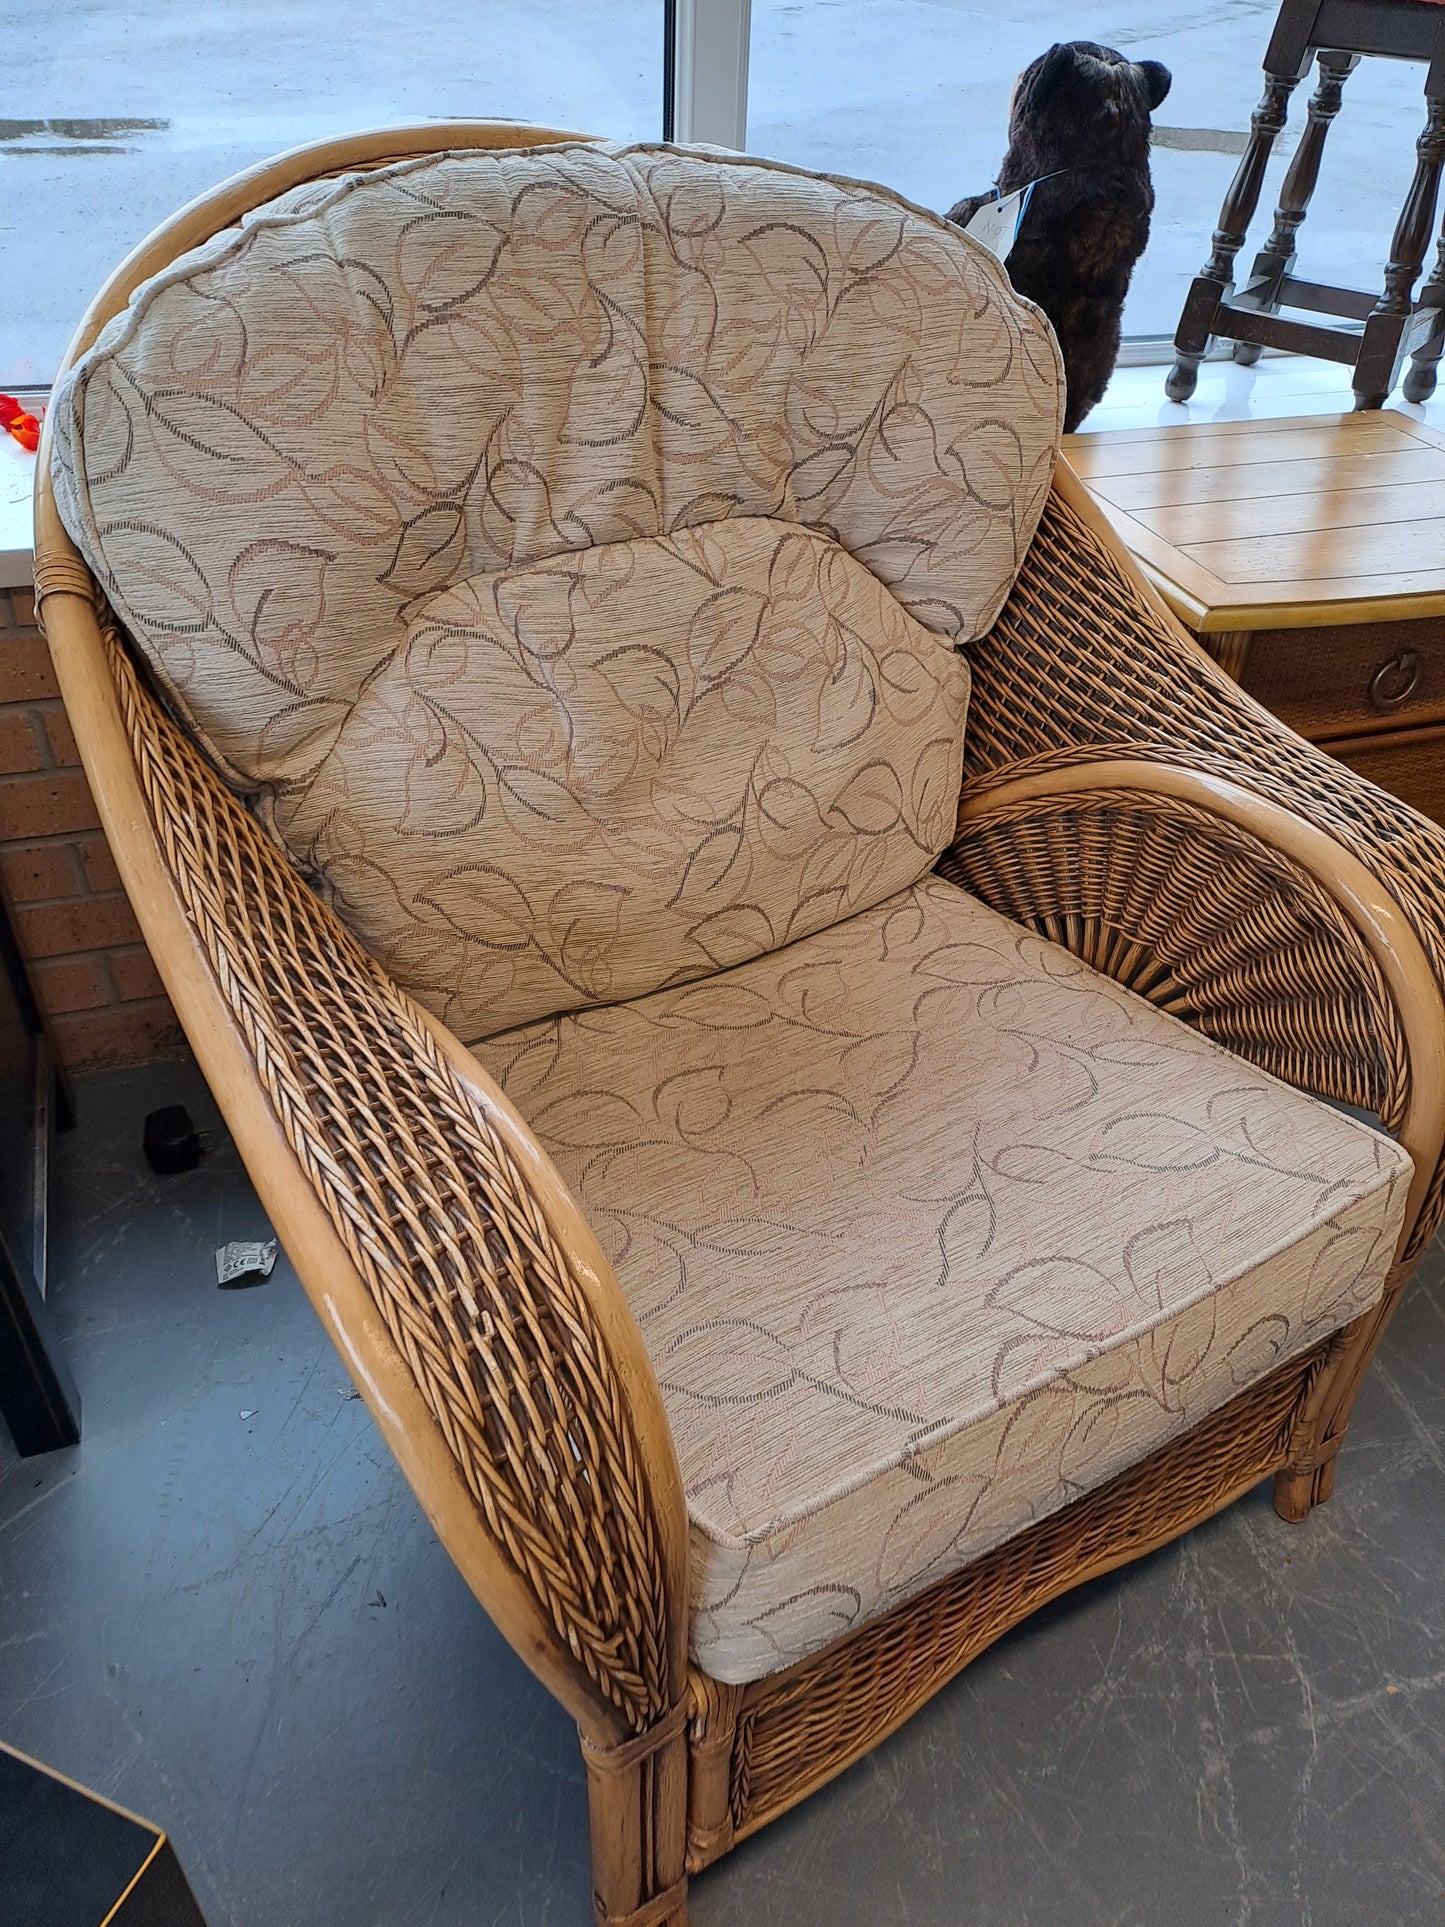 Cane/Wicker armchairs & footstool